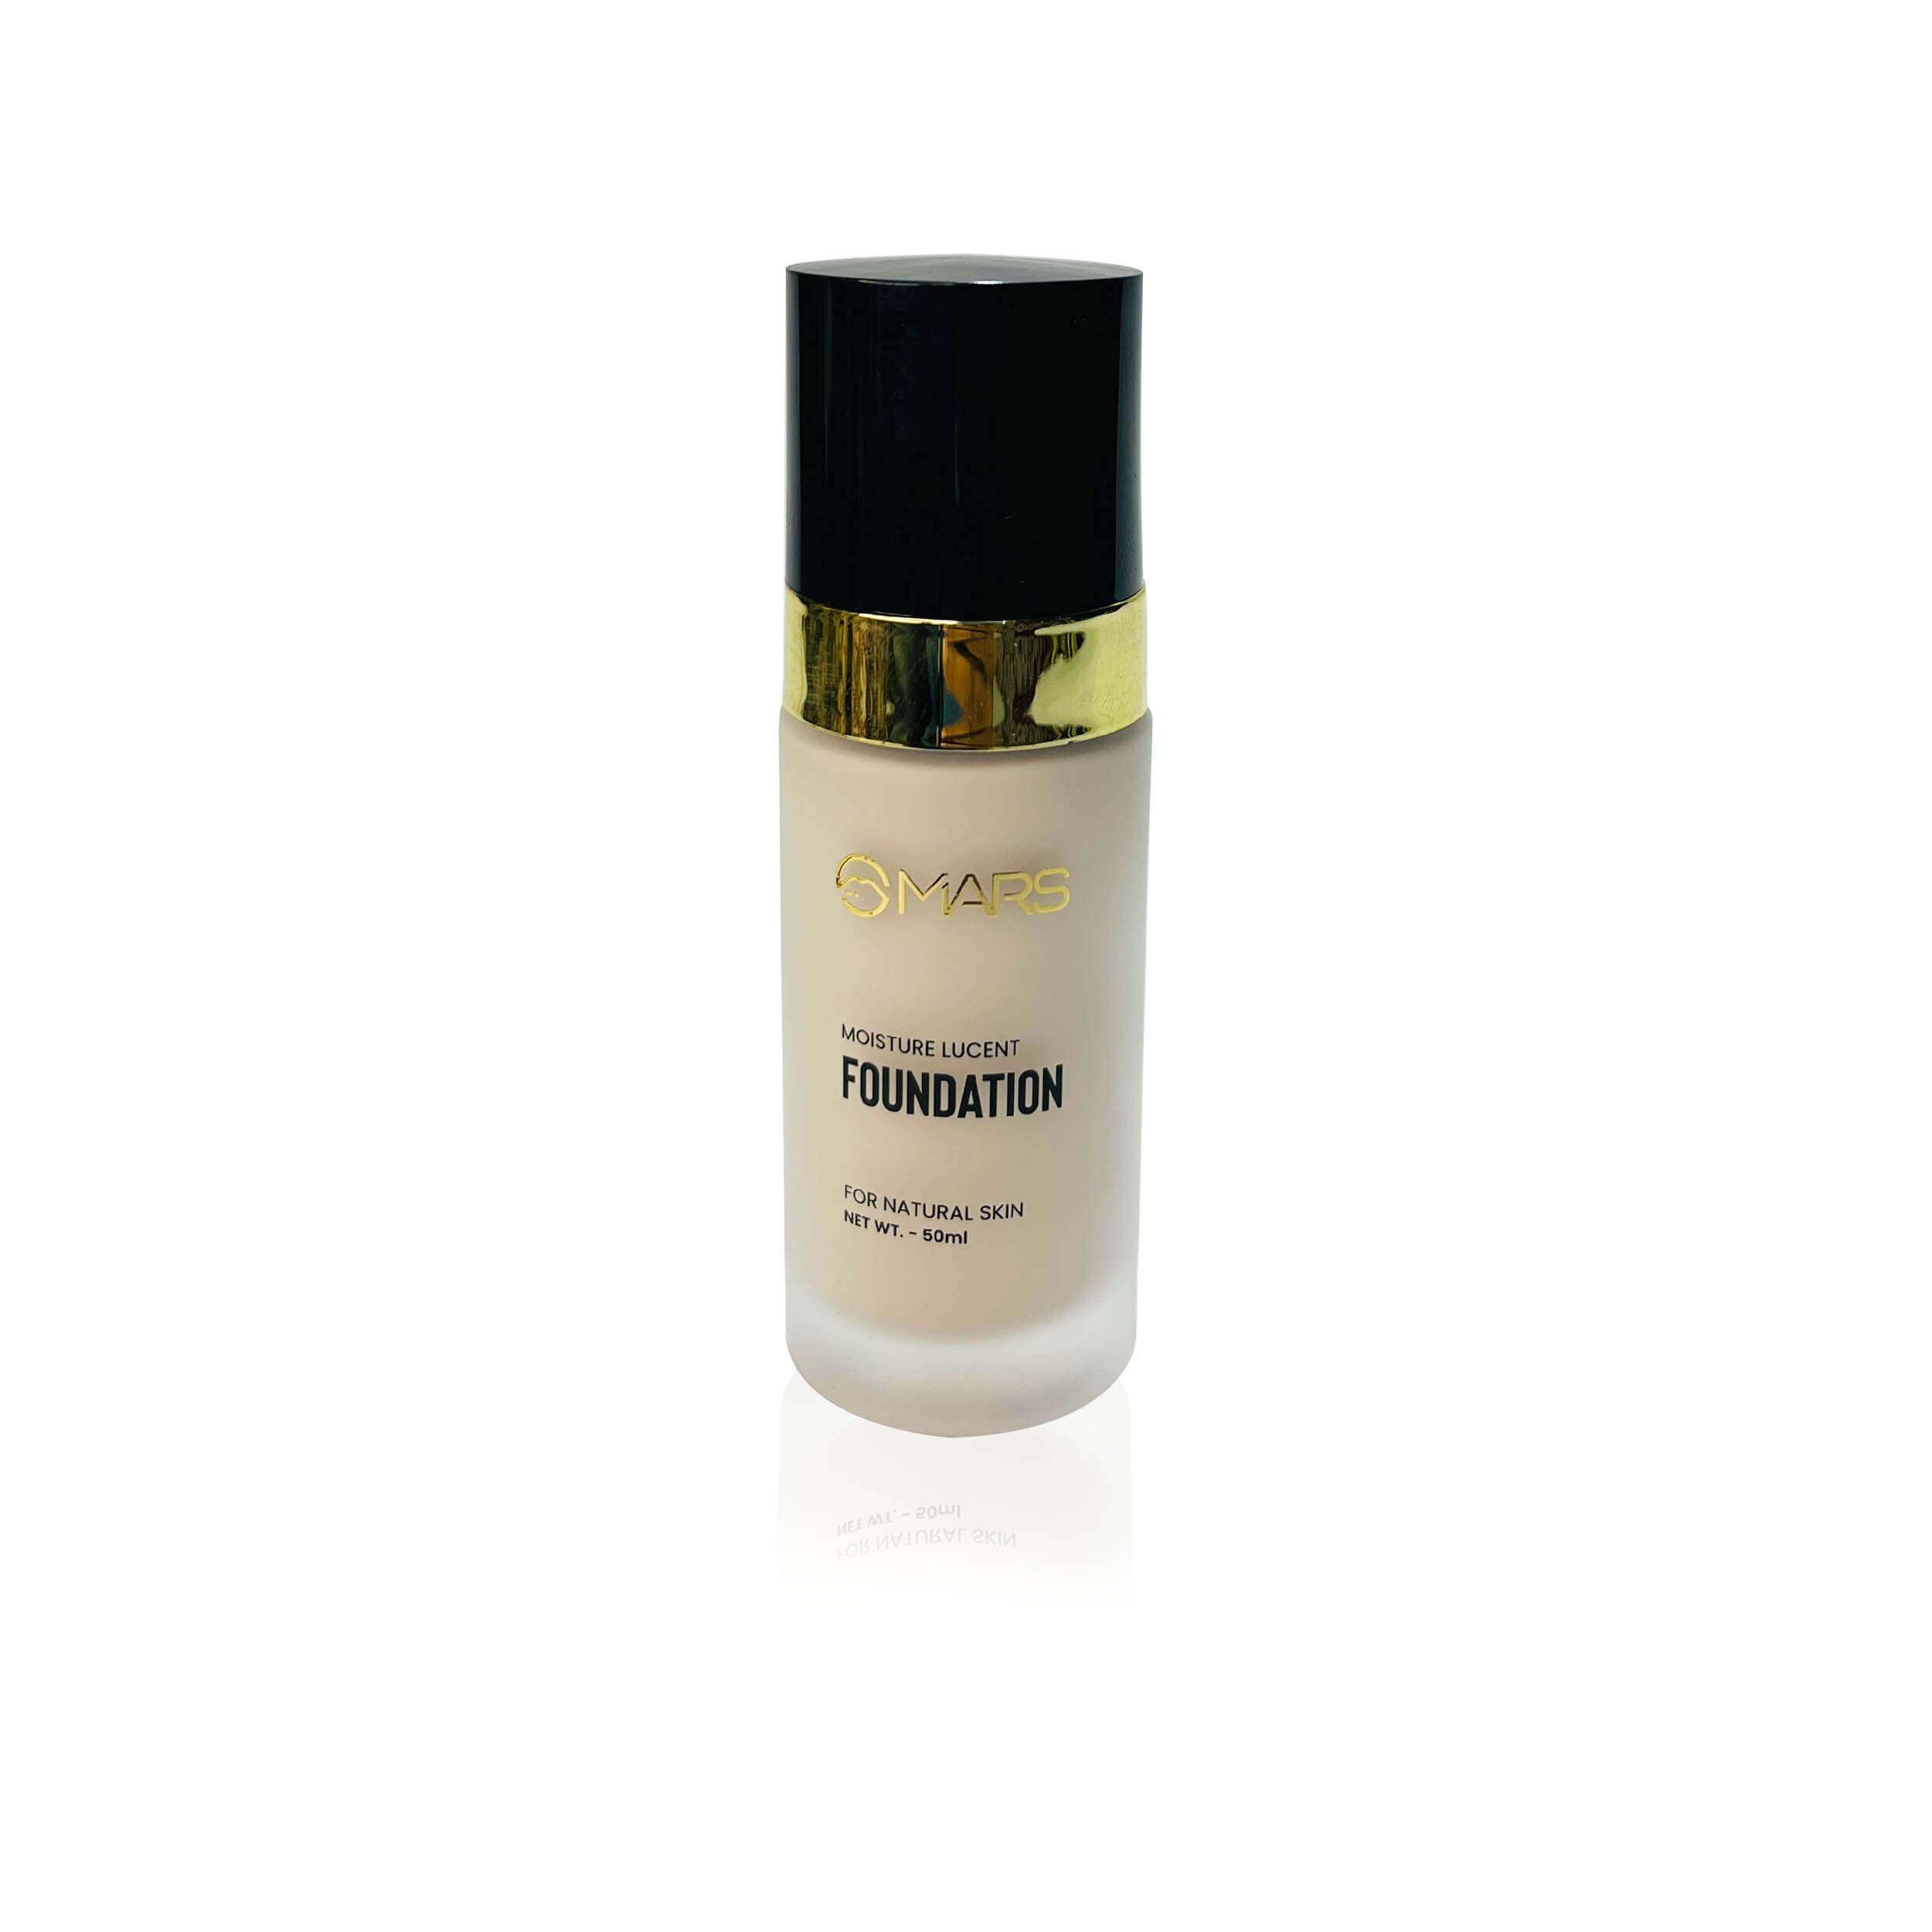 MARS Moisture Lucent Foundation for Natural Skin - Shade 02 Long Lasting 50ml